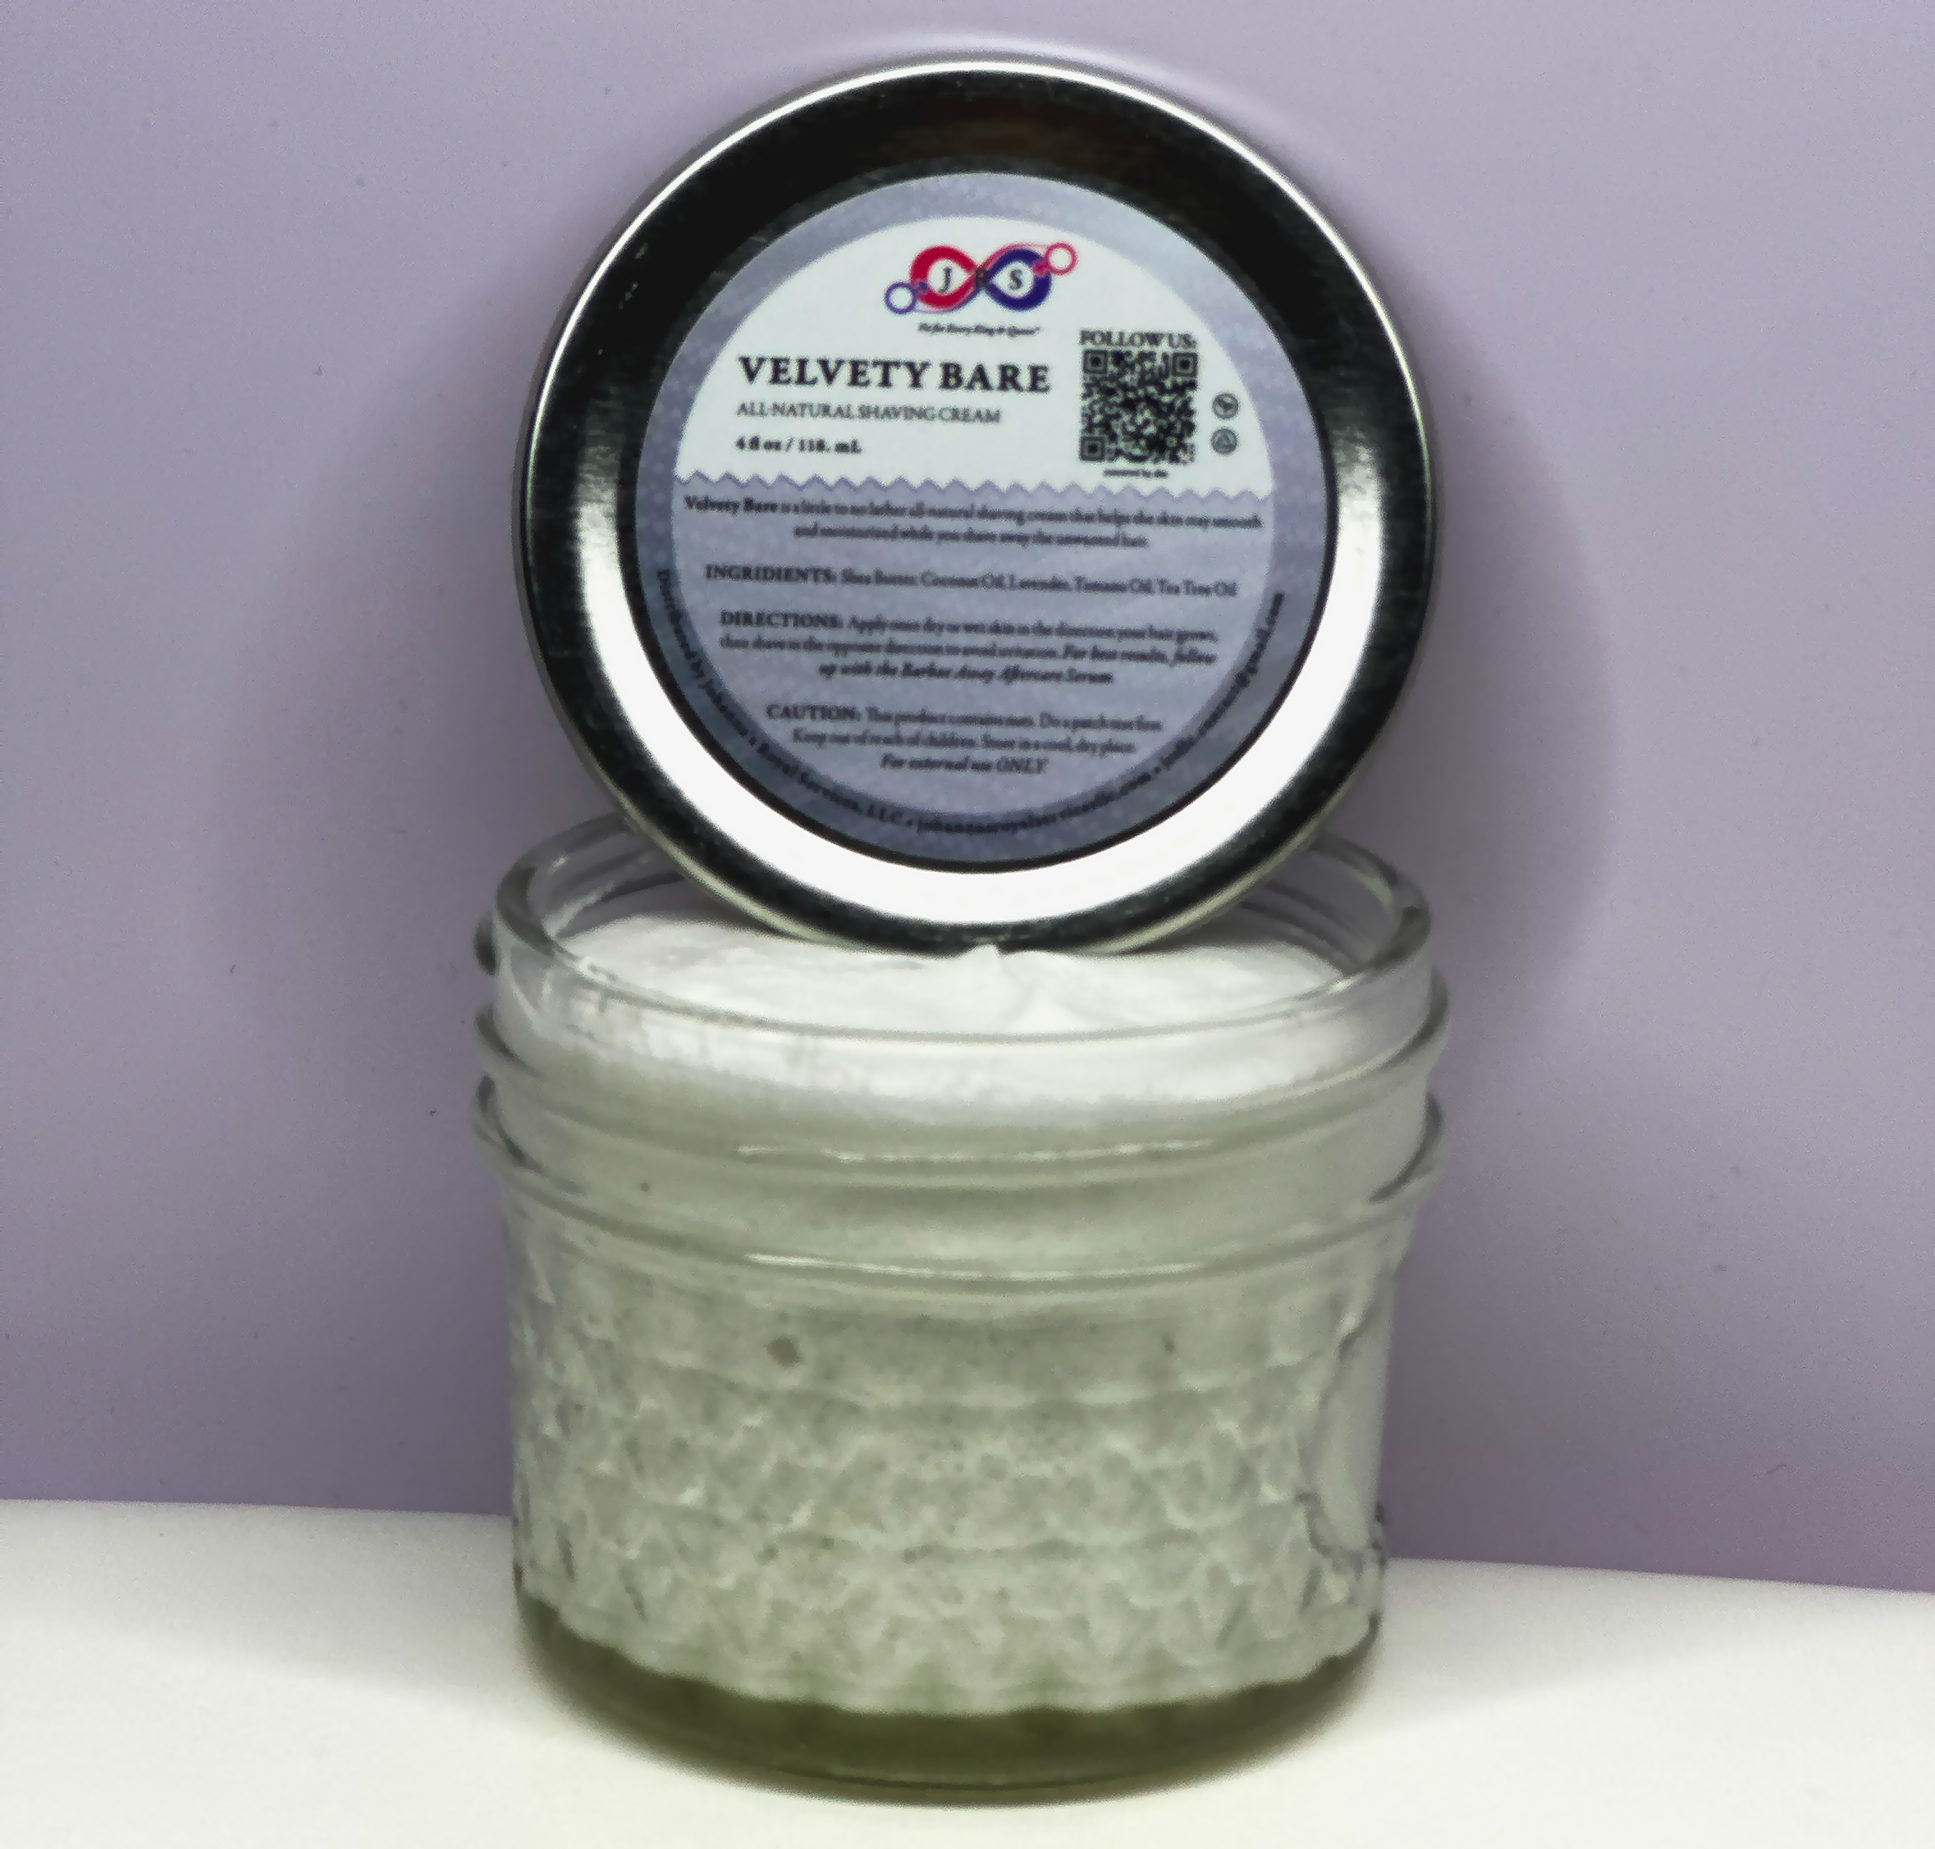 An opened jar of Velvety Bare Shaving Cream with the lid resting on the top and showing the product content